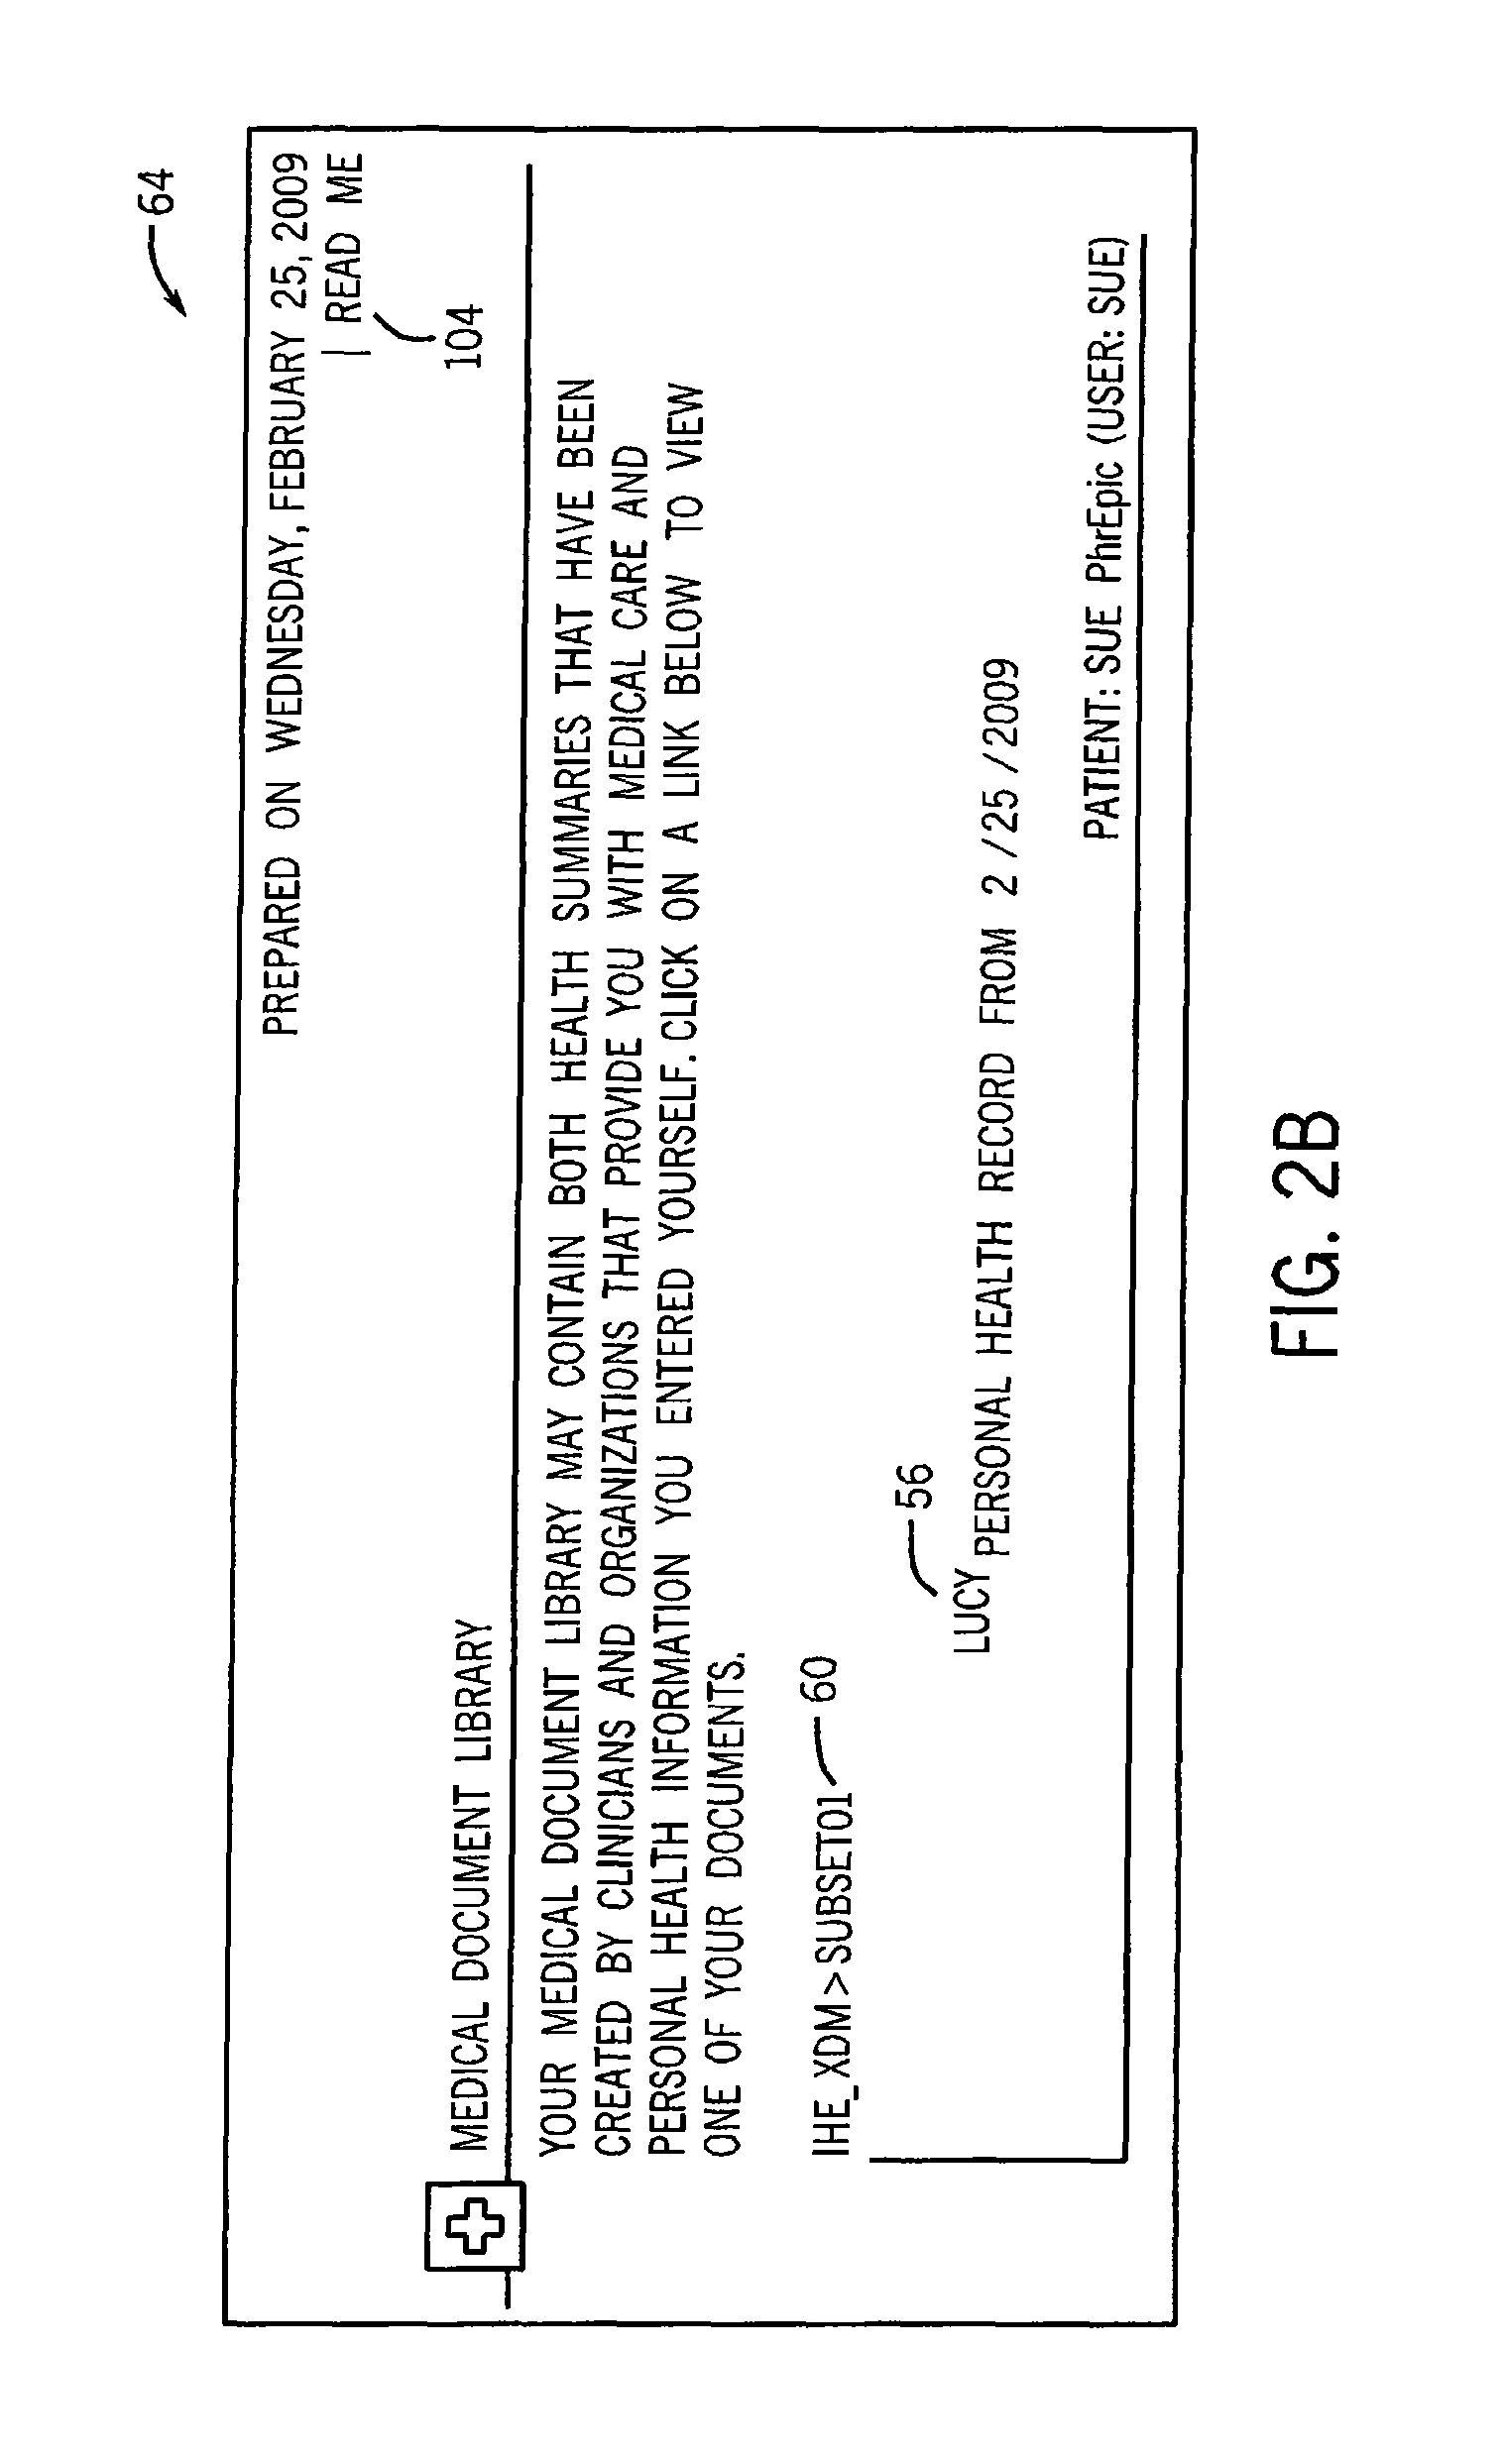 System and method for secured health record account registration